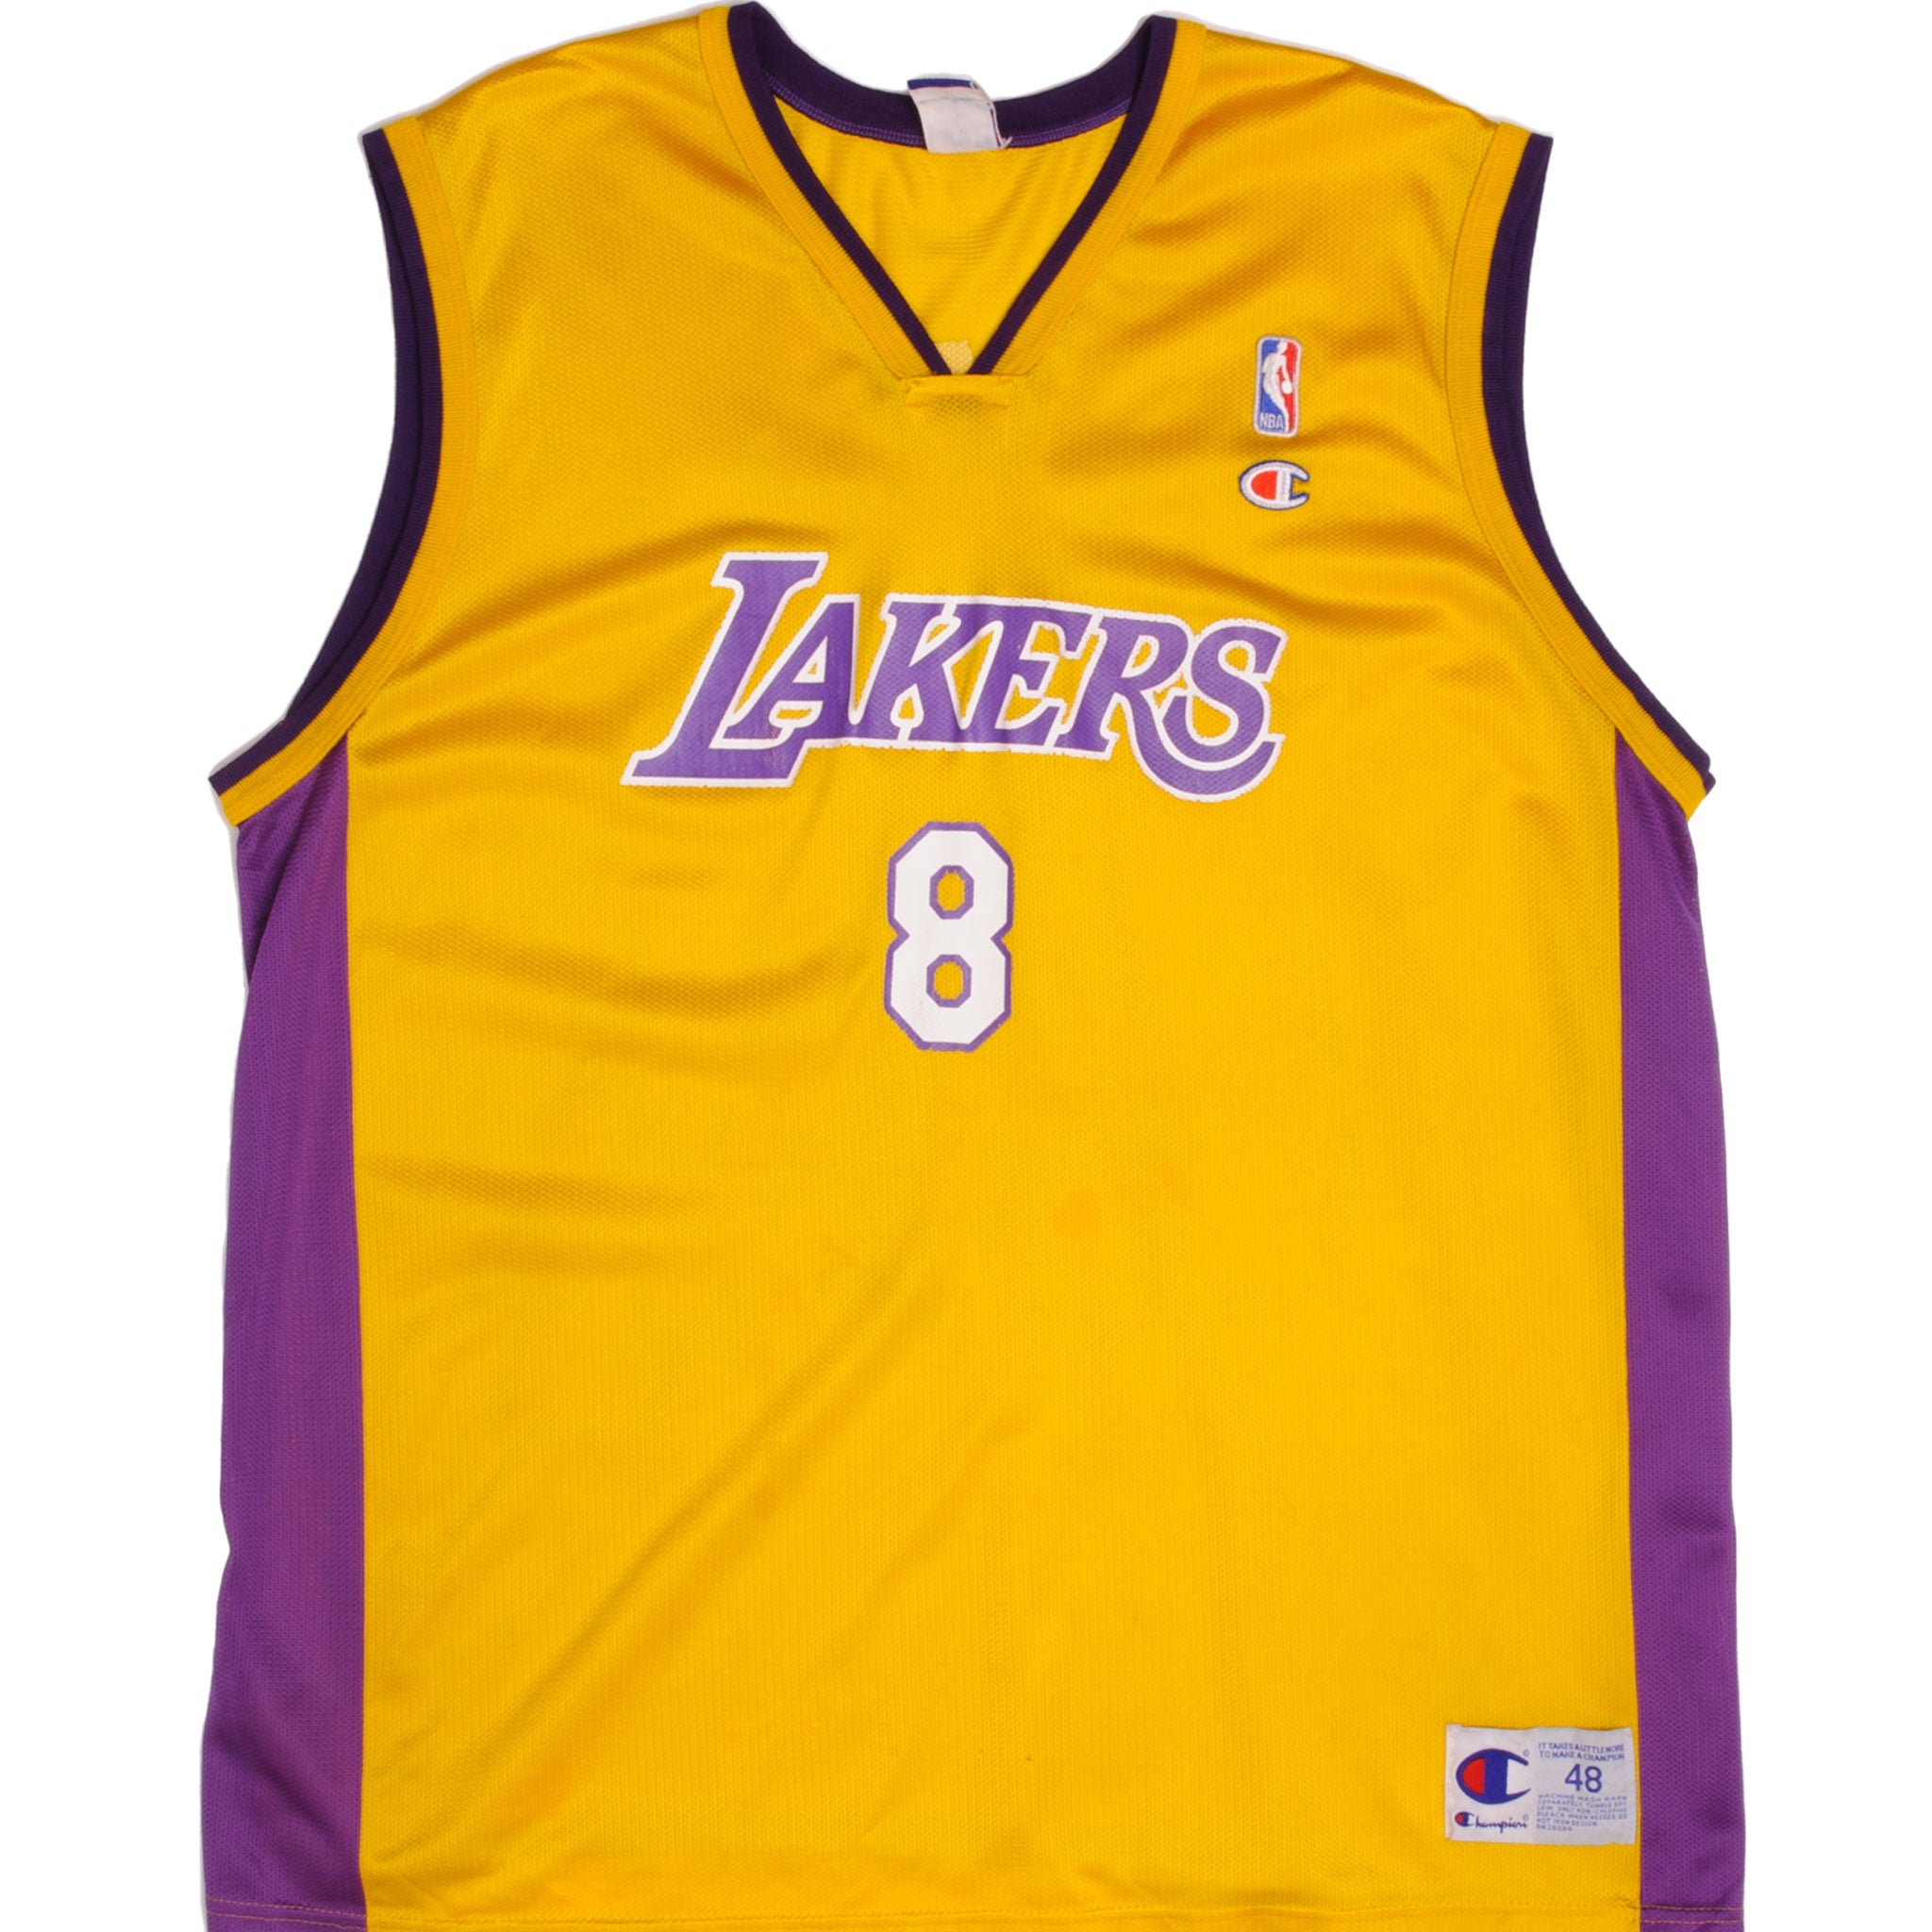 Clothes for Dogs Los Angeles Lakers Kobe Bryant #24 Pet Jersey